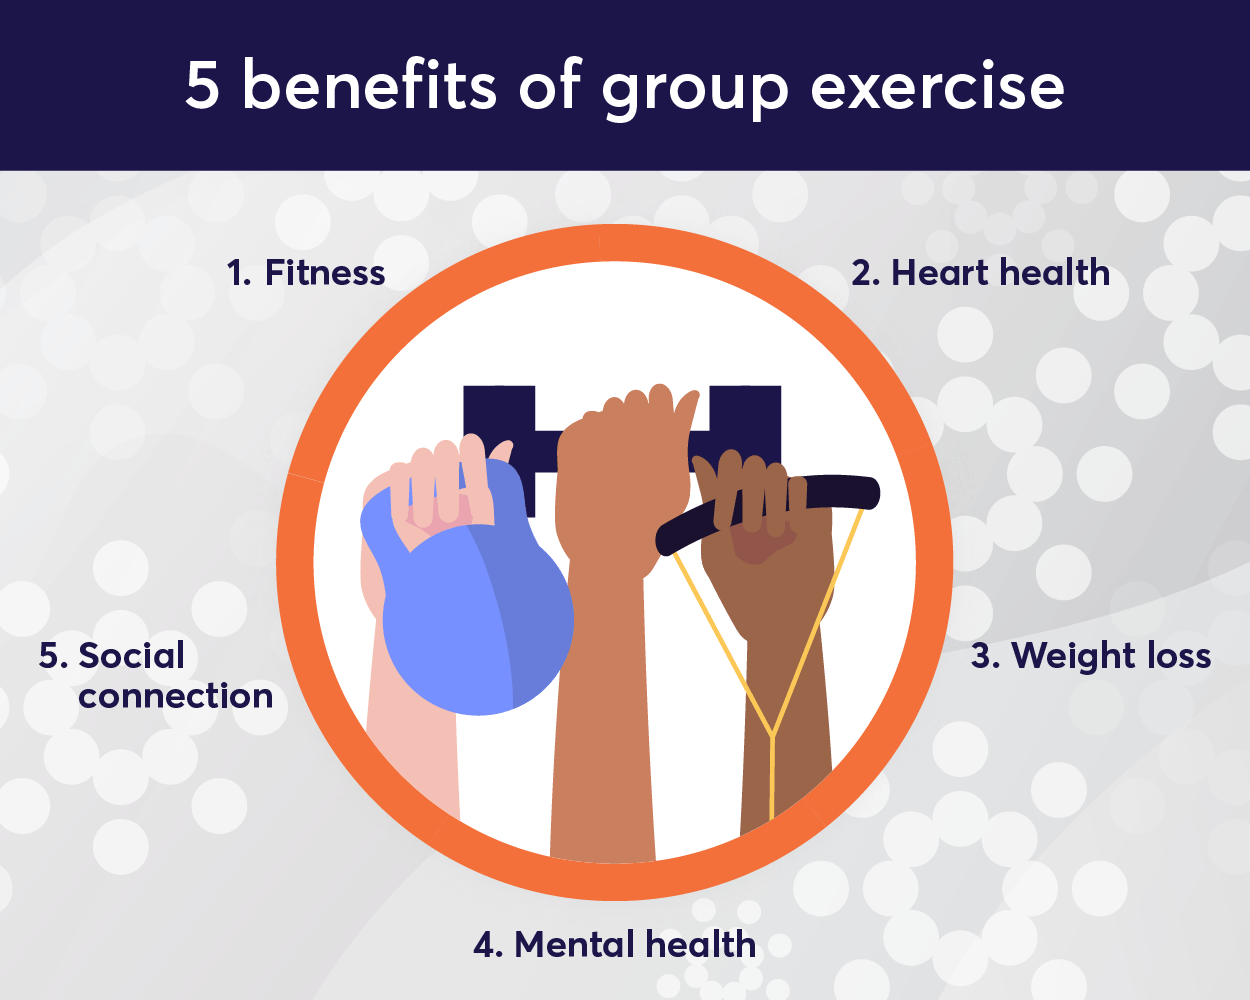 Group exercise puts the fun and motivation into fitness!